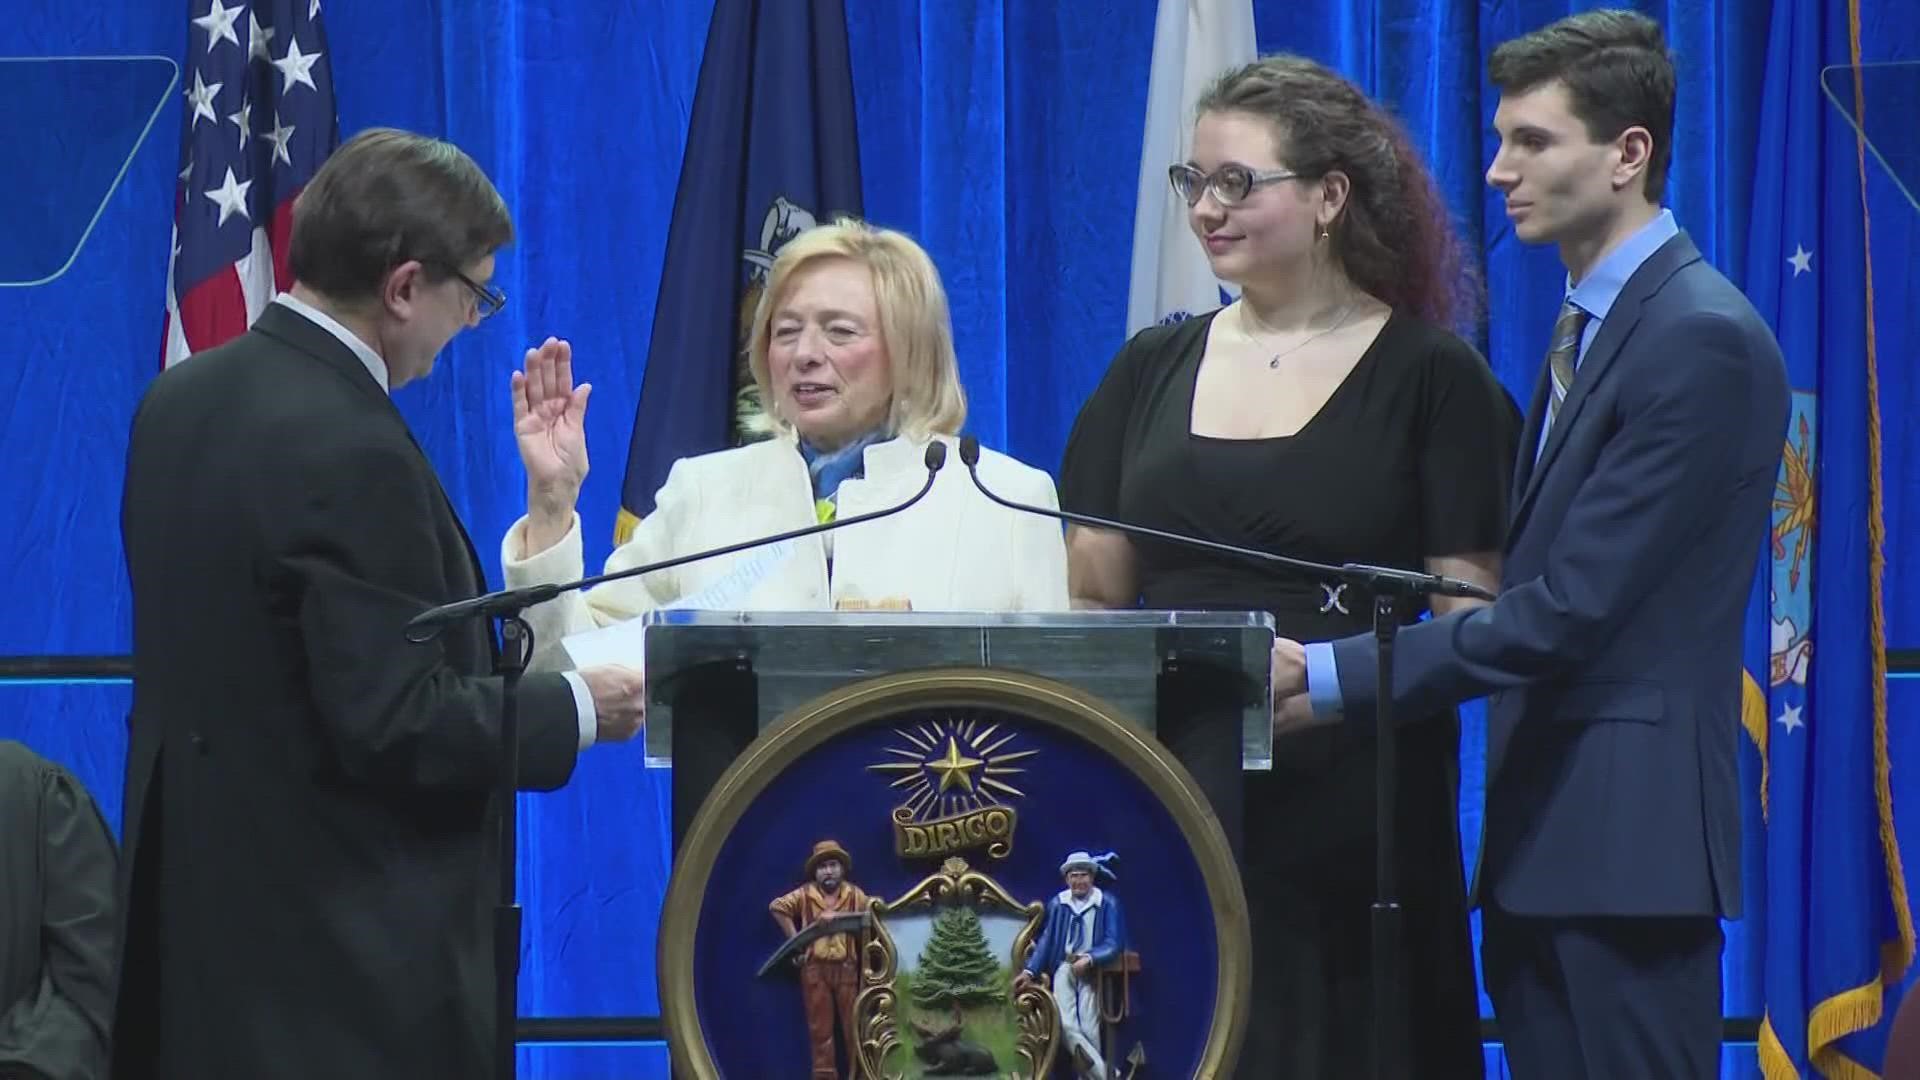 The inauguration ceremony began at 4:30 p.m. Wednesday at the Augusta Civic Center.